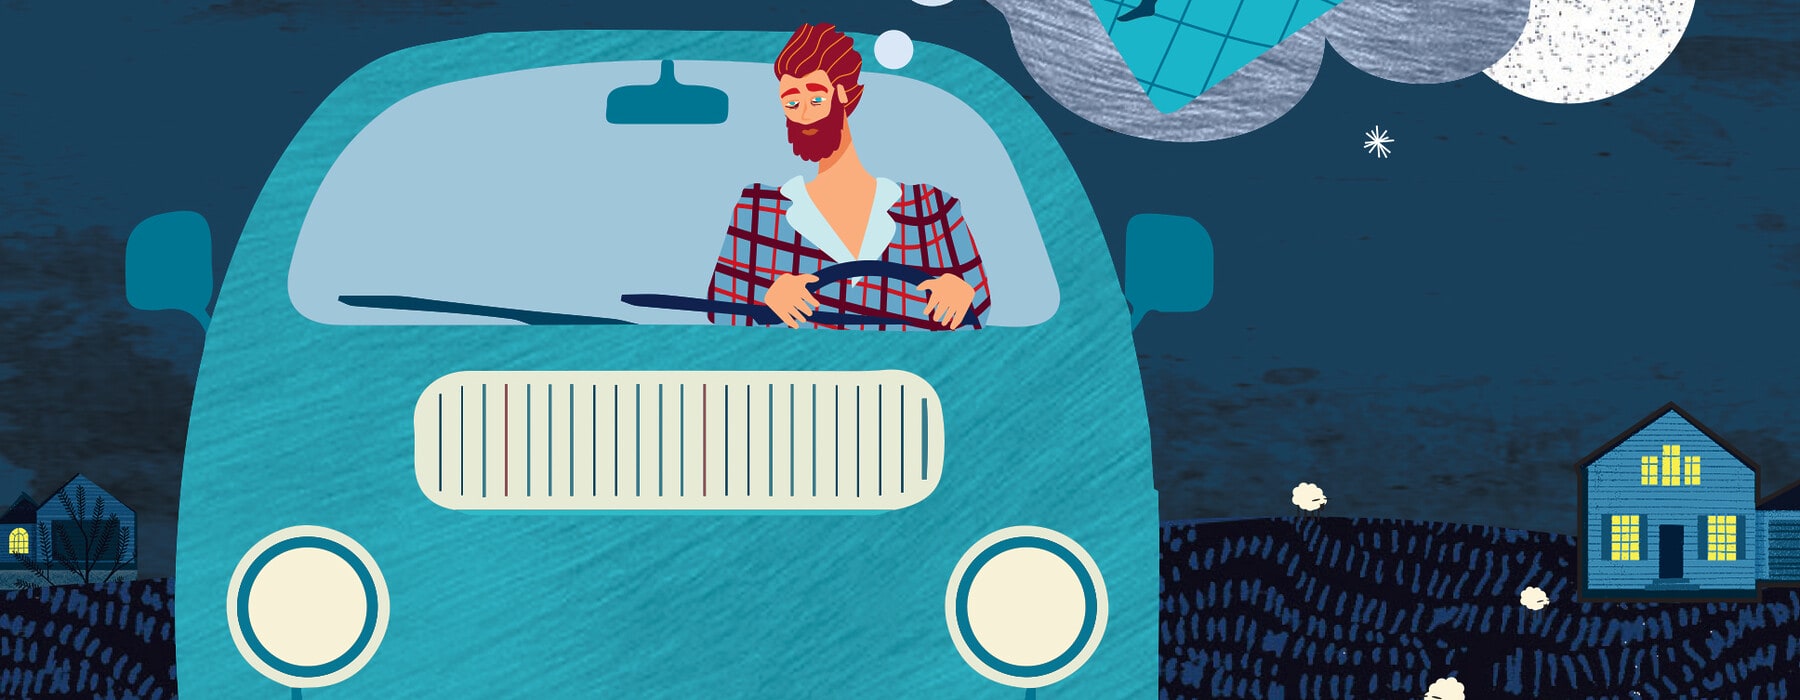 Illustration of man driving at night while distracted due to lack of sleep